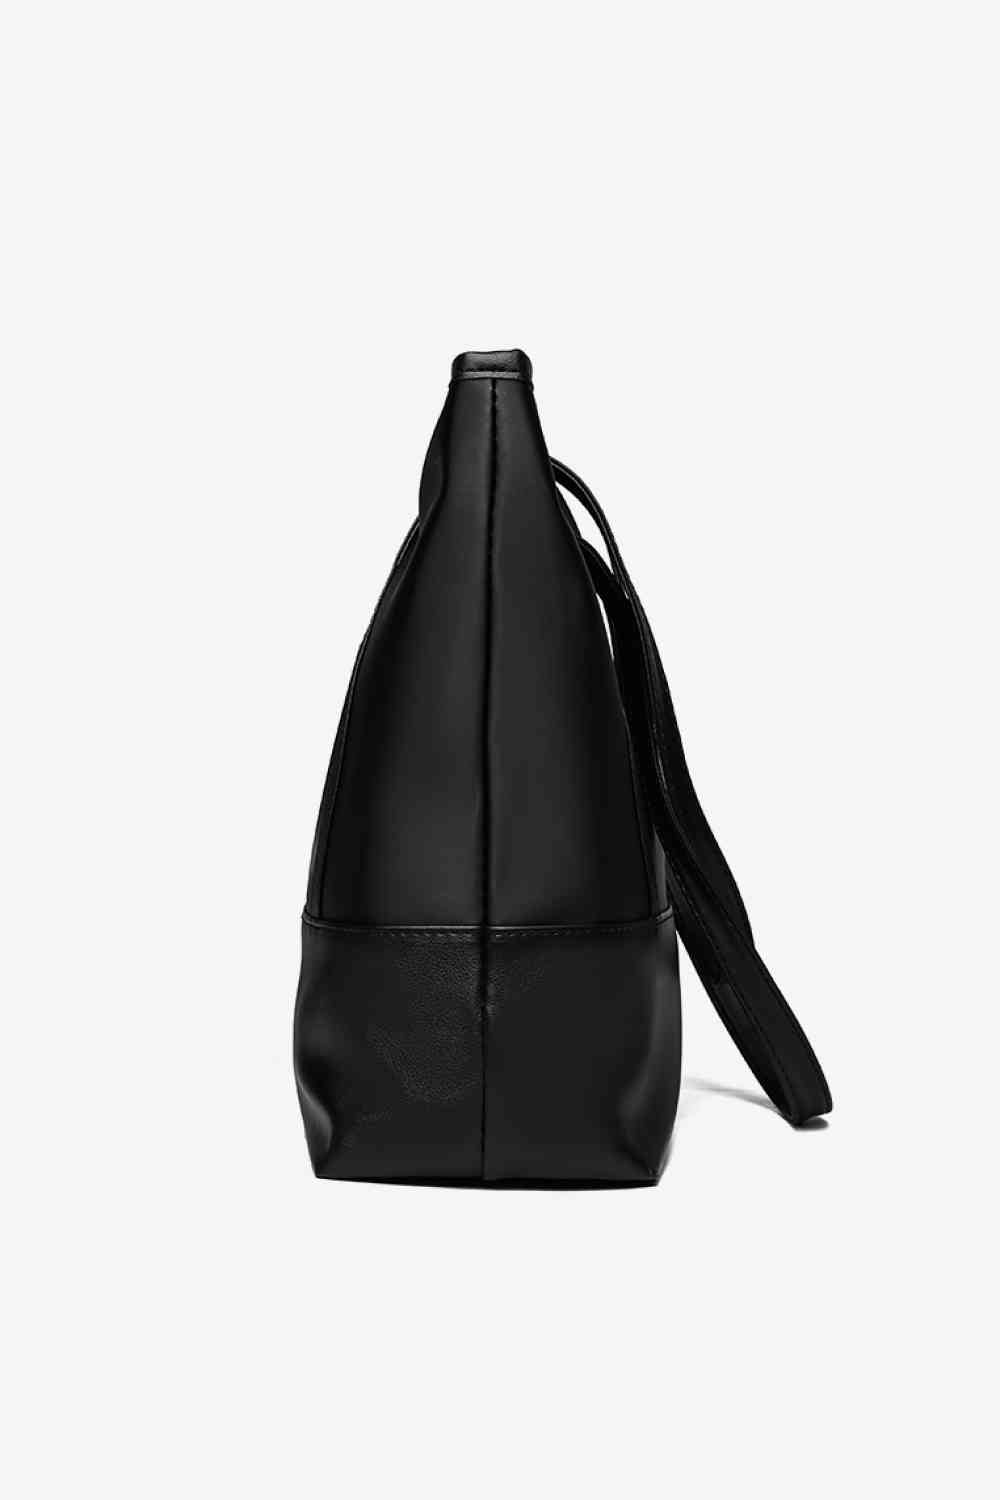 Obsidian Forest Vegan Leather Tote Bag | Hypoallergenic - Allergy Friendly - Naturally Free